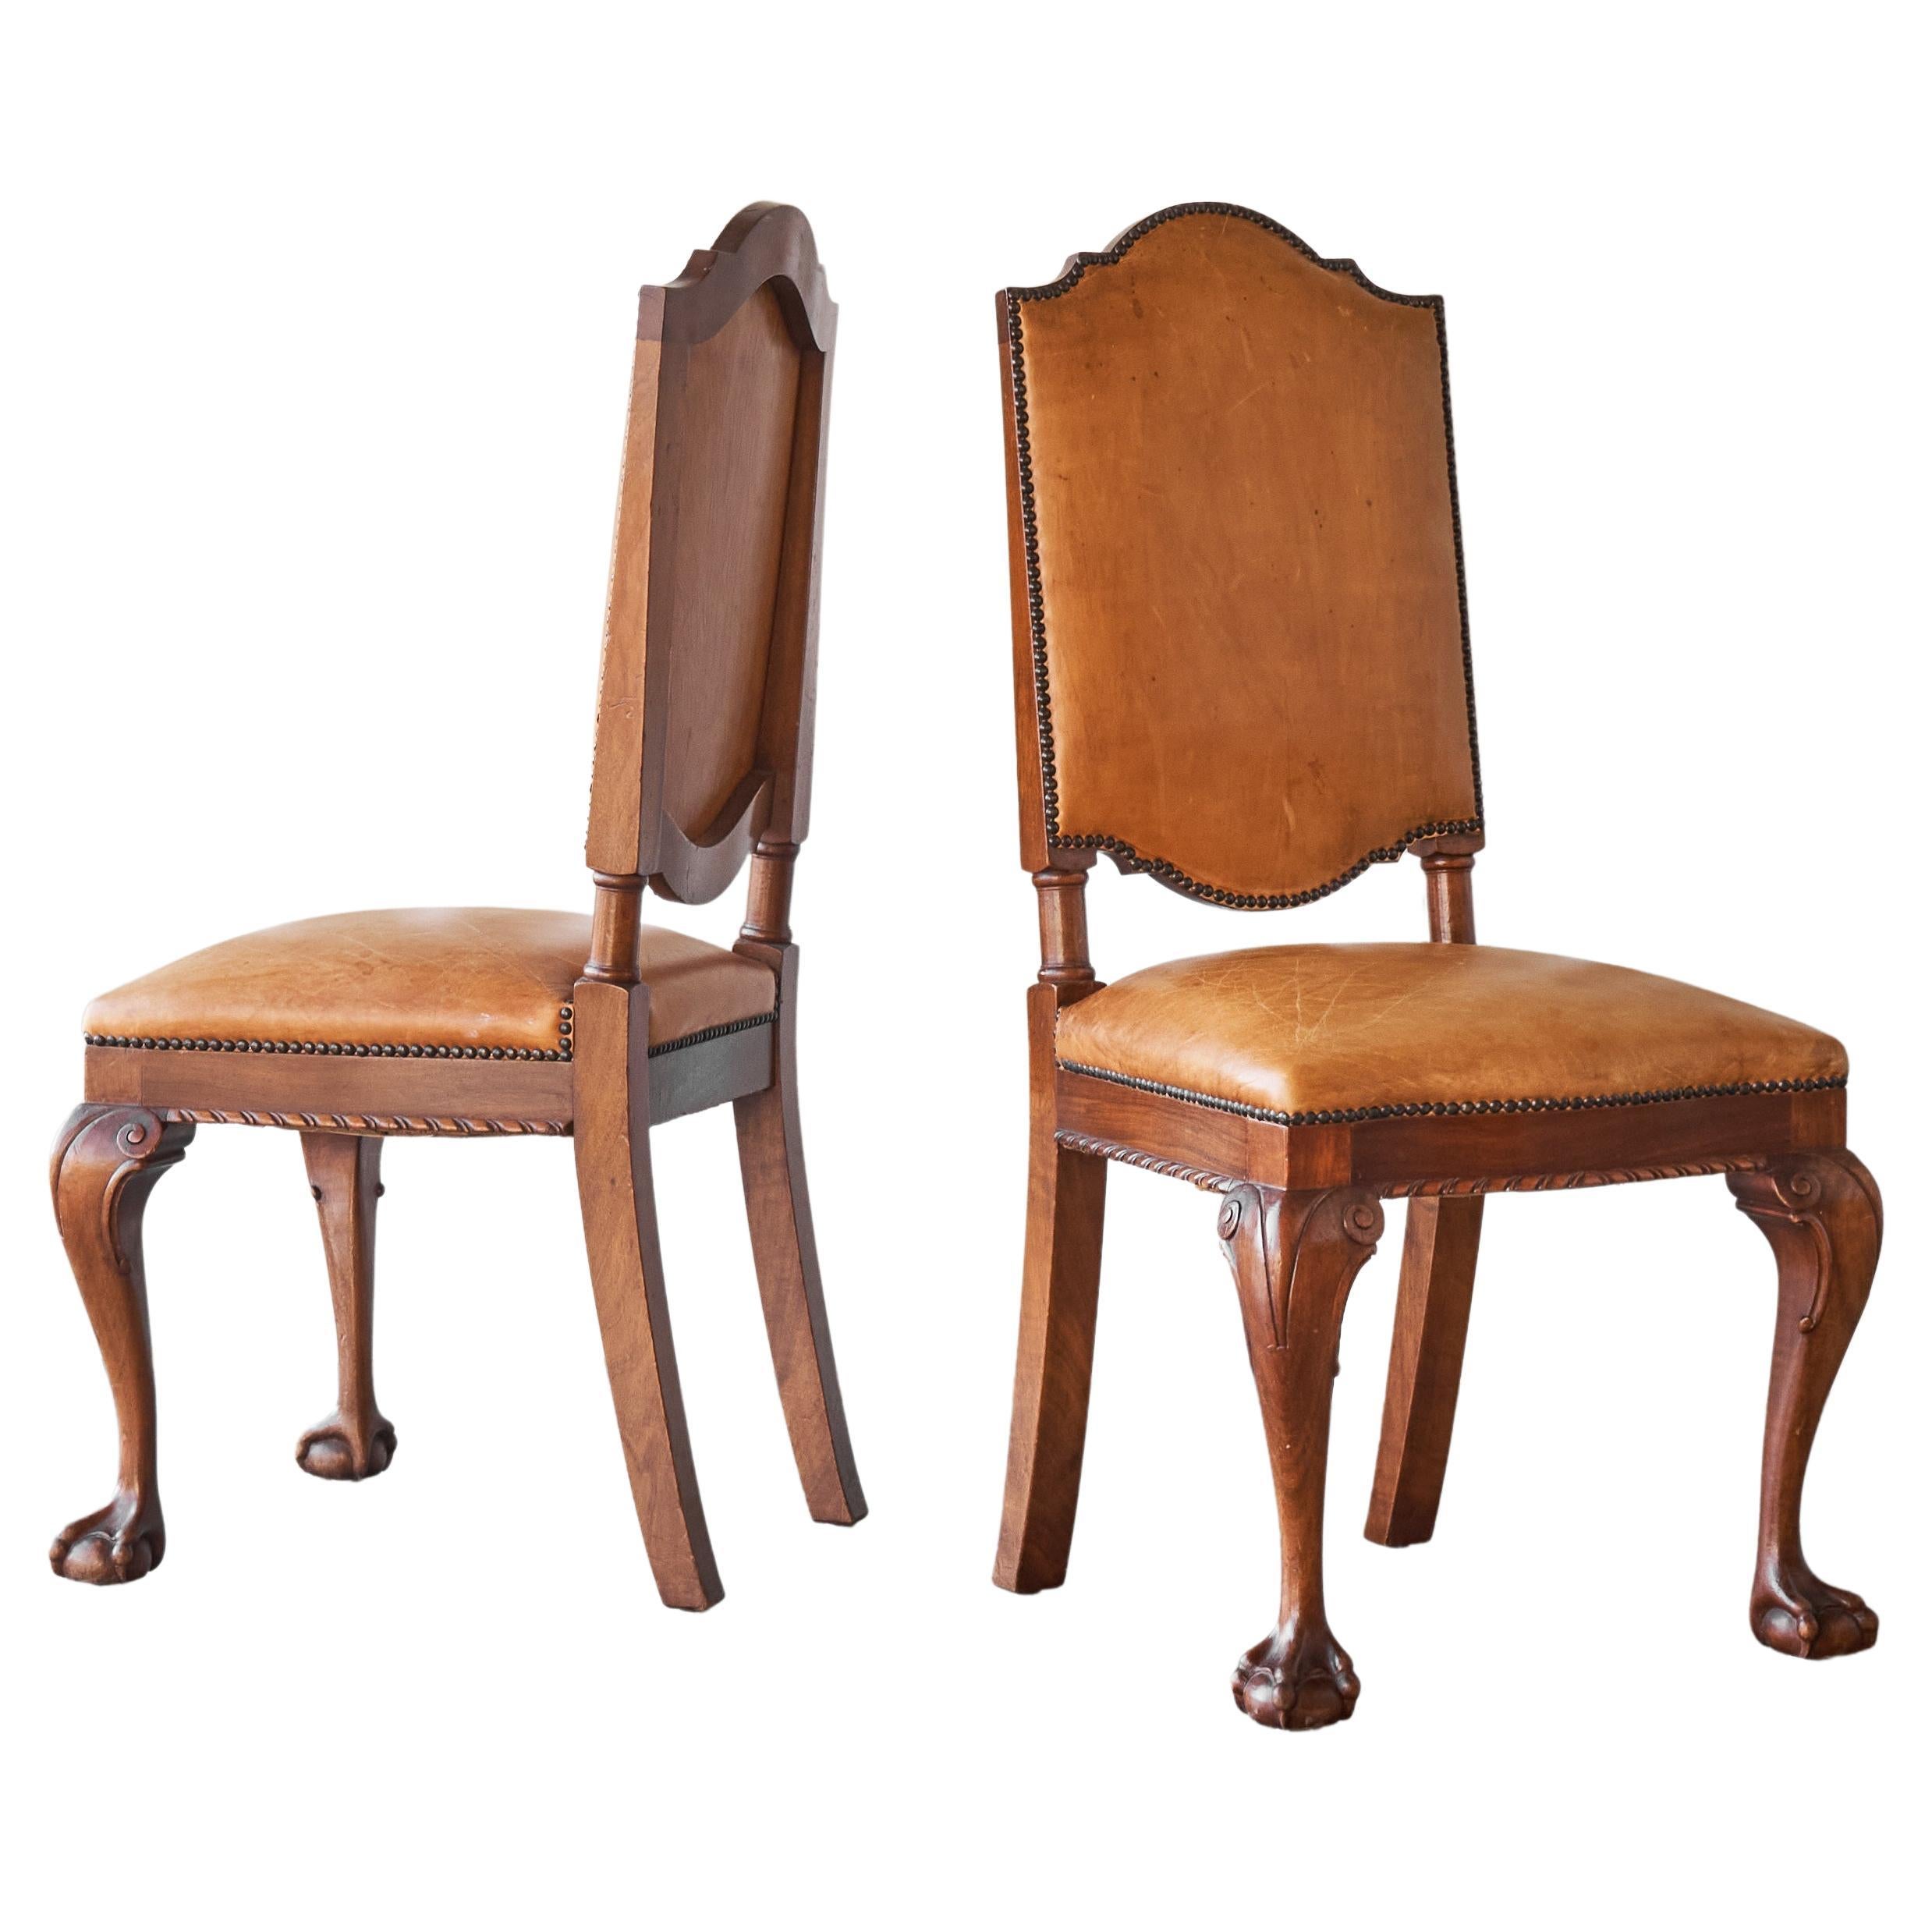 't Woonhuys Amsterdam Rare Pair of Side Chairs in Patinated Cognac Leather 1920s